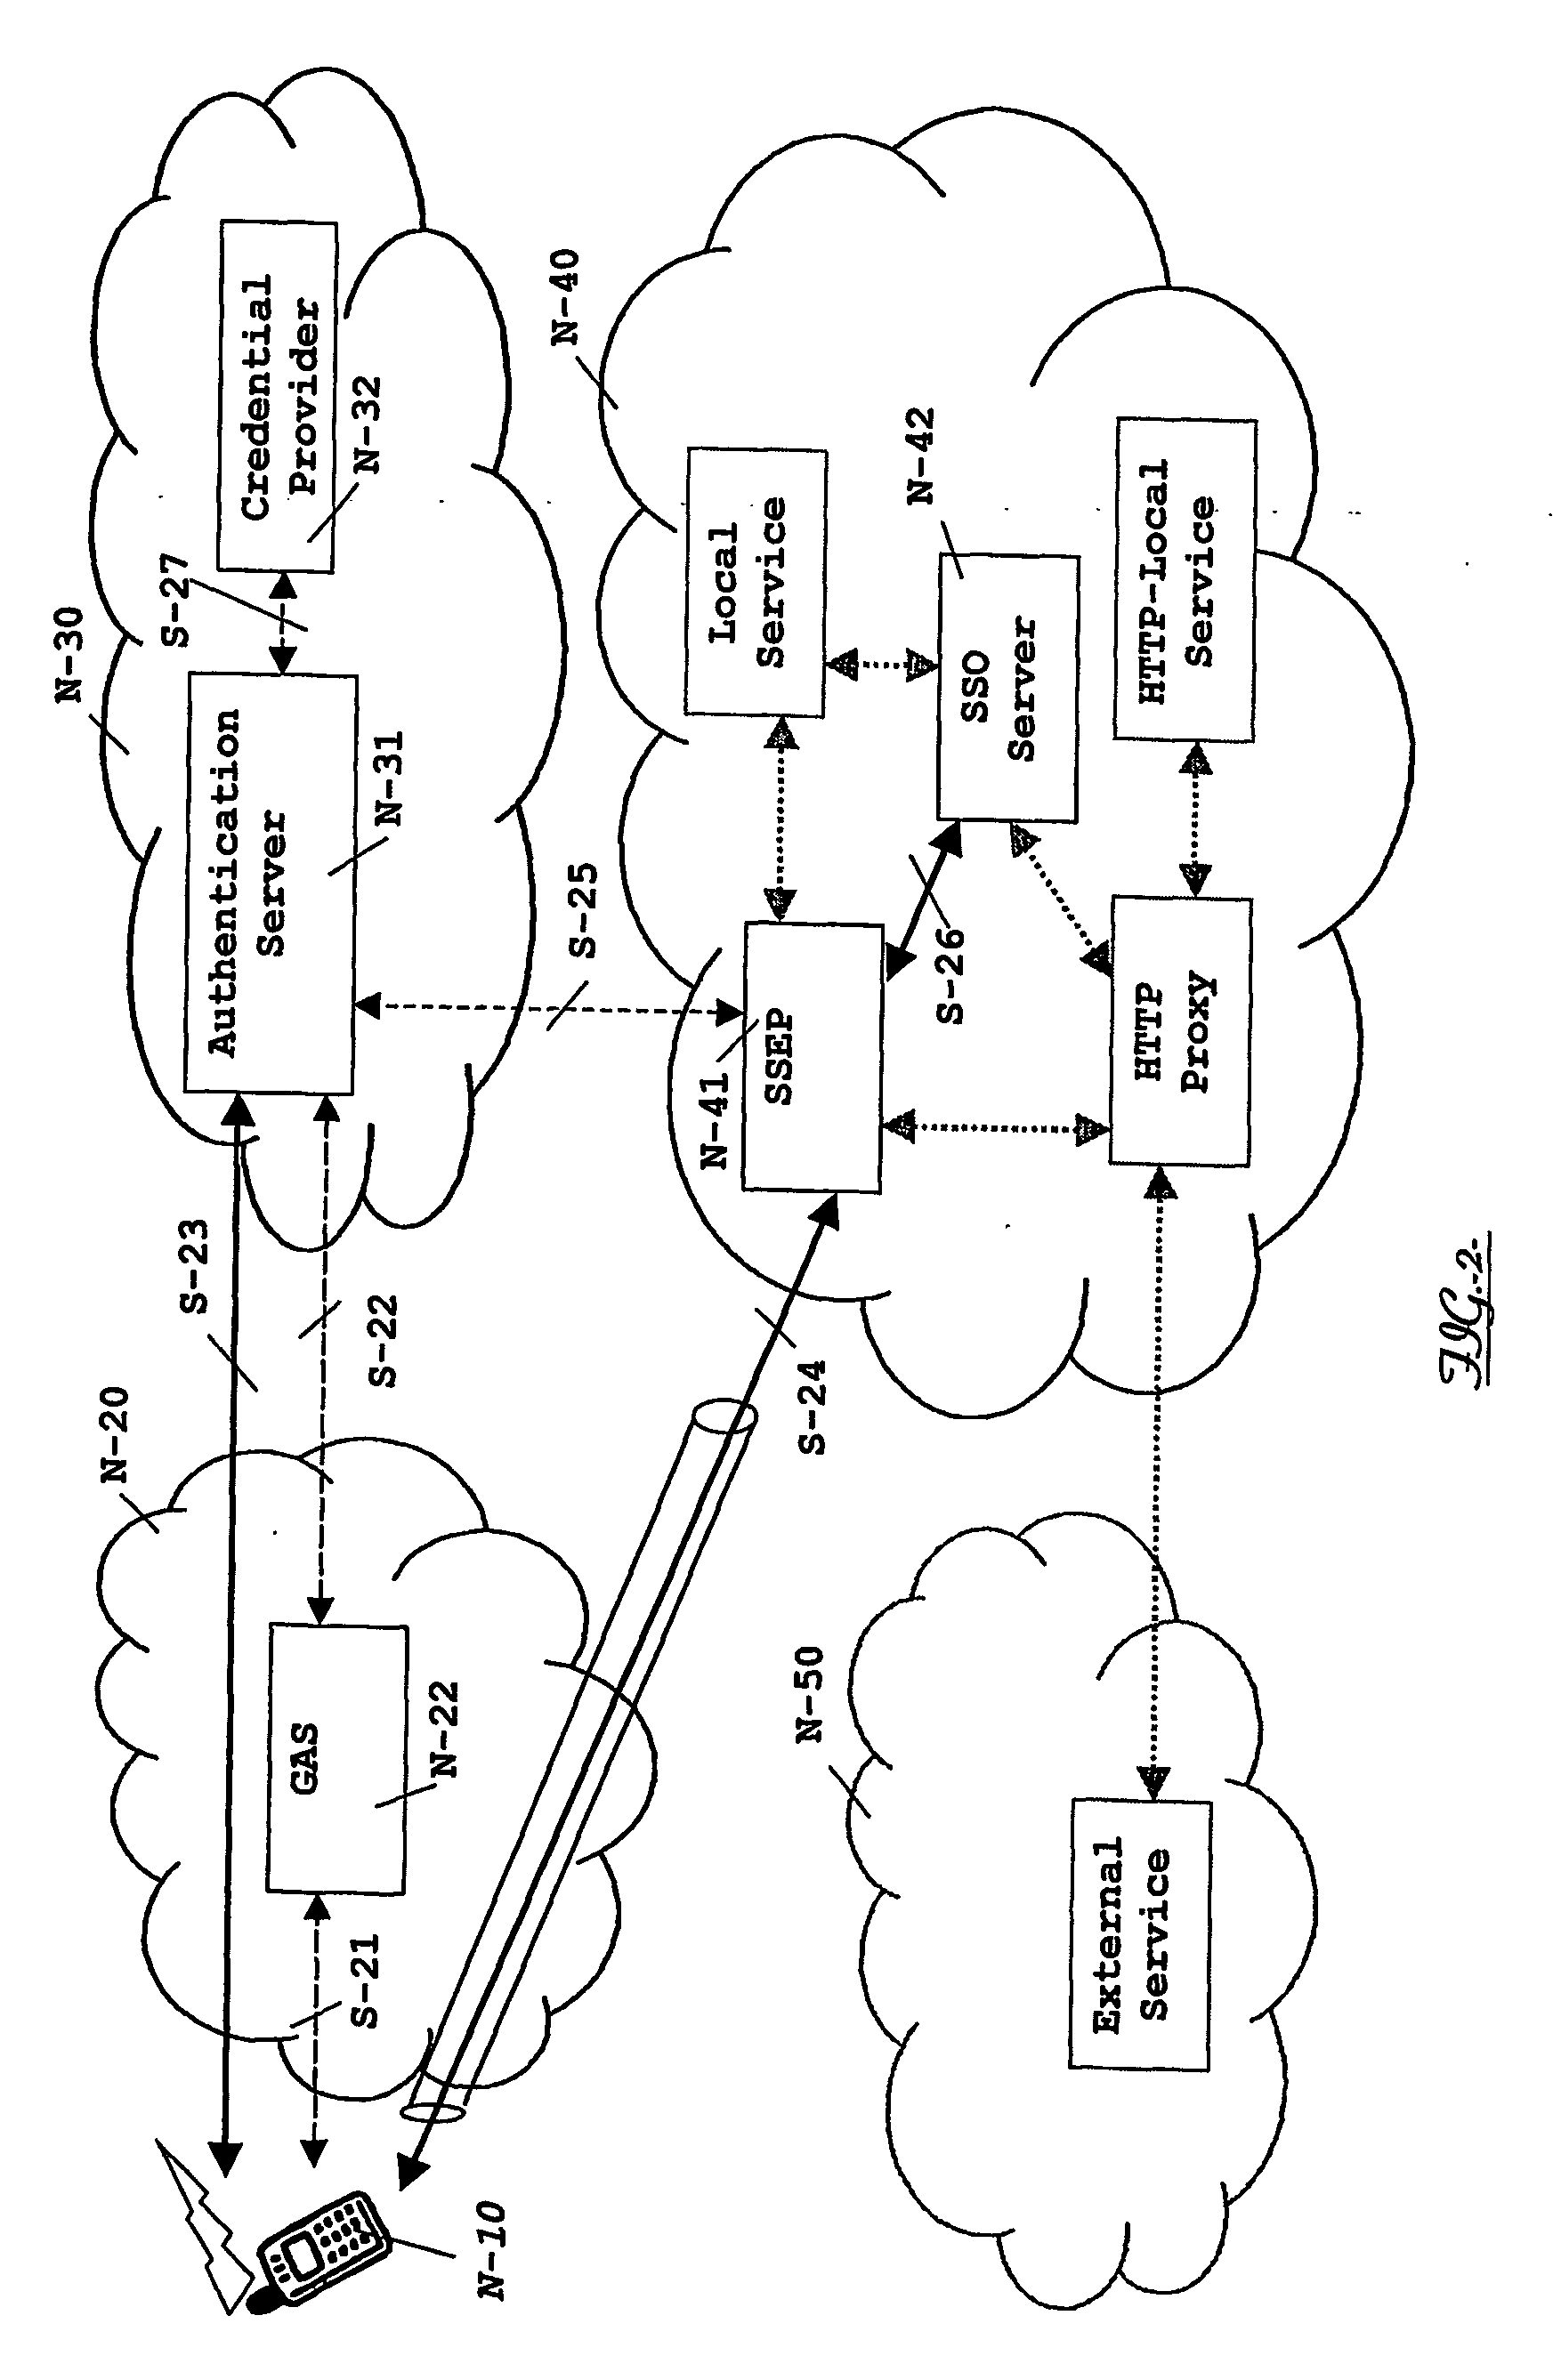 Apparatus and method for a single sign-on authentication through a non-trusted access network